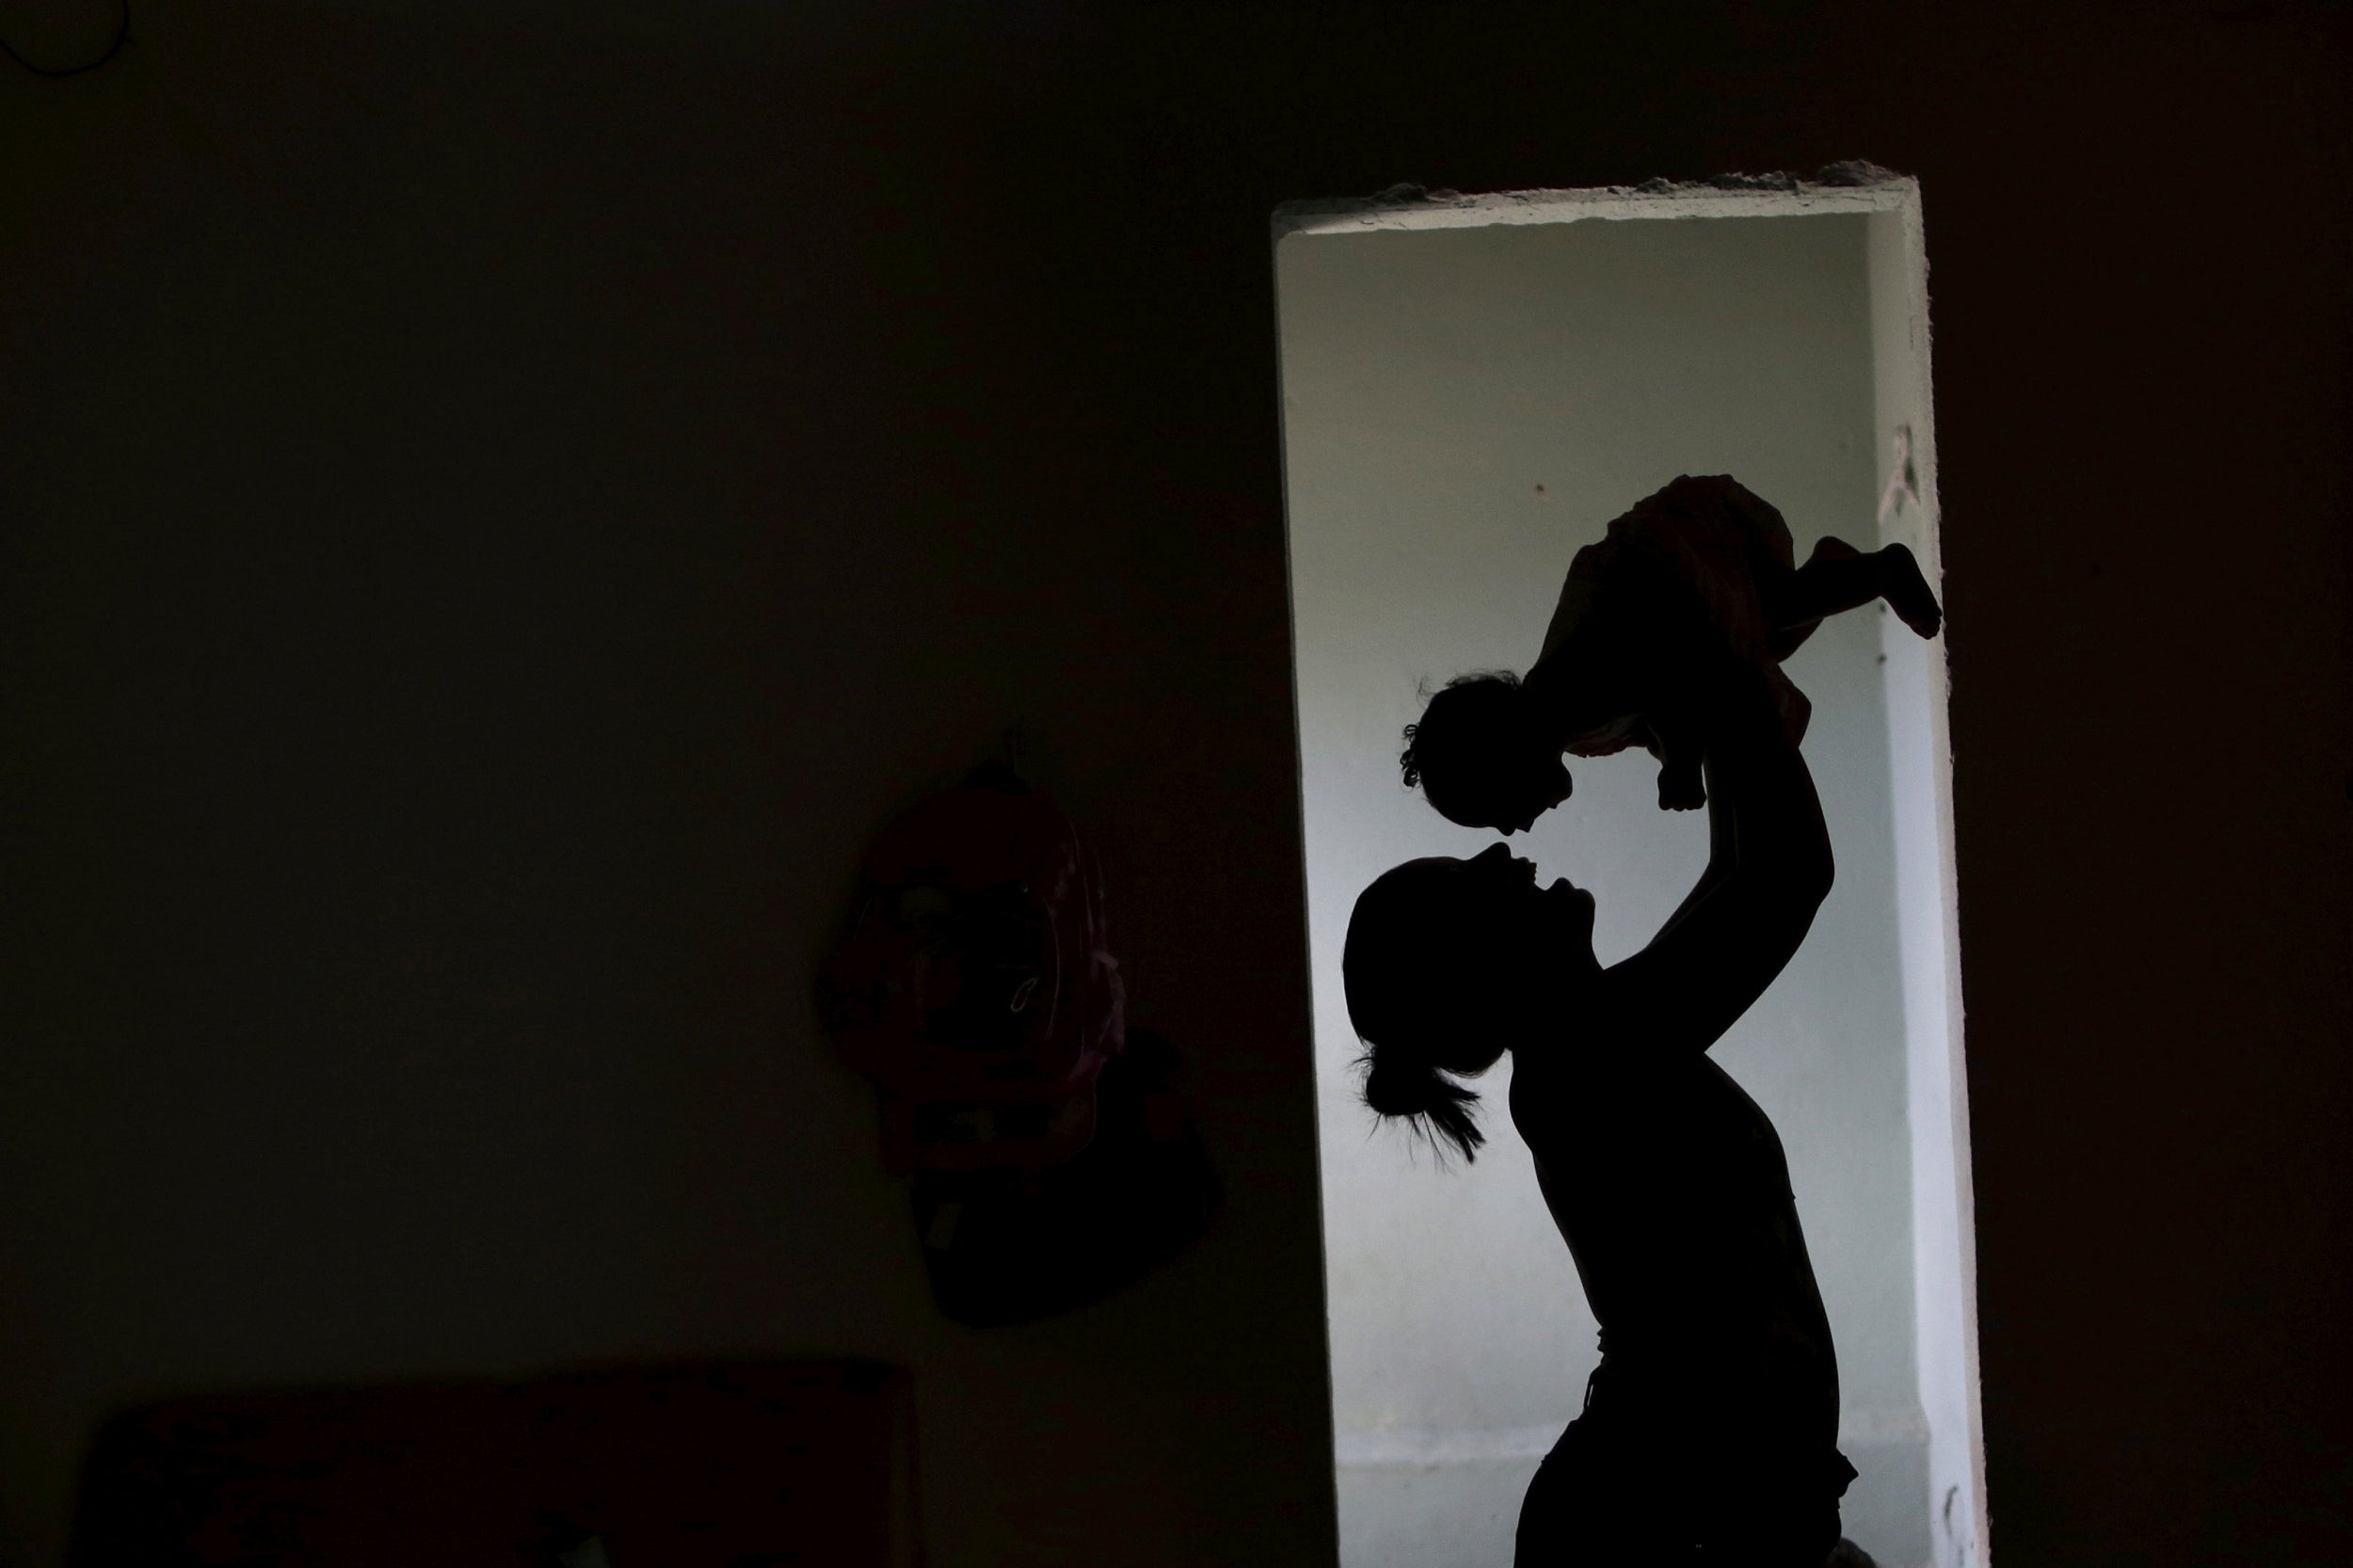 Rosana holds her daughter Luana Vieira, who was born with microcephaly, at their house in 2016